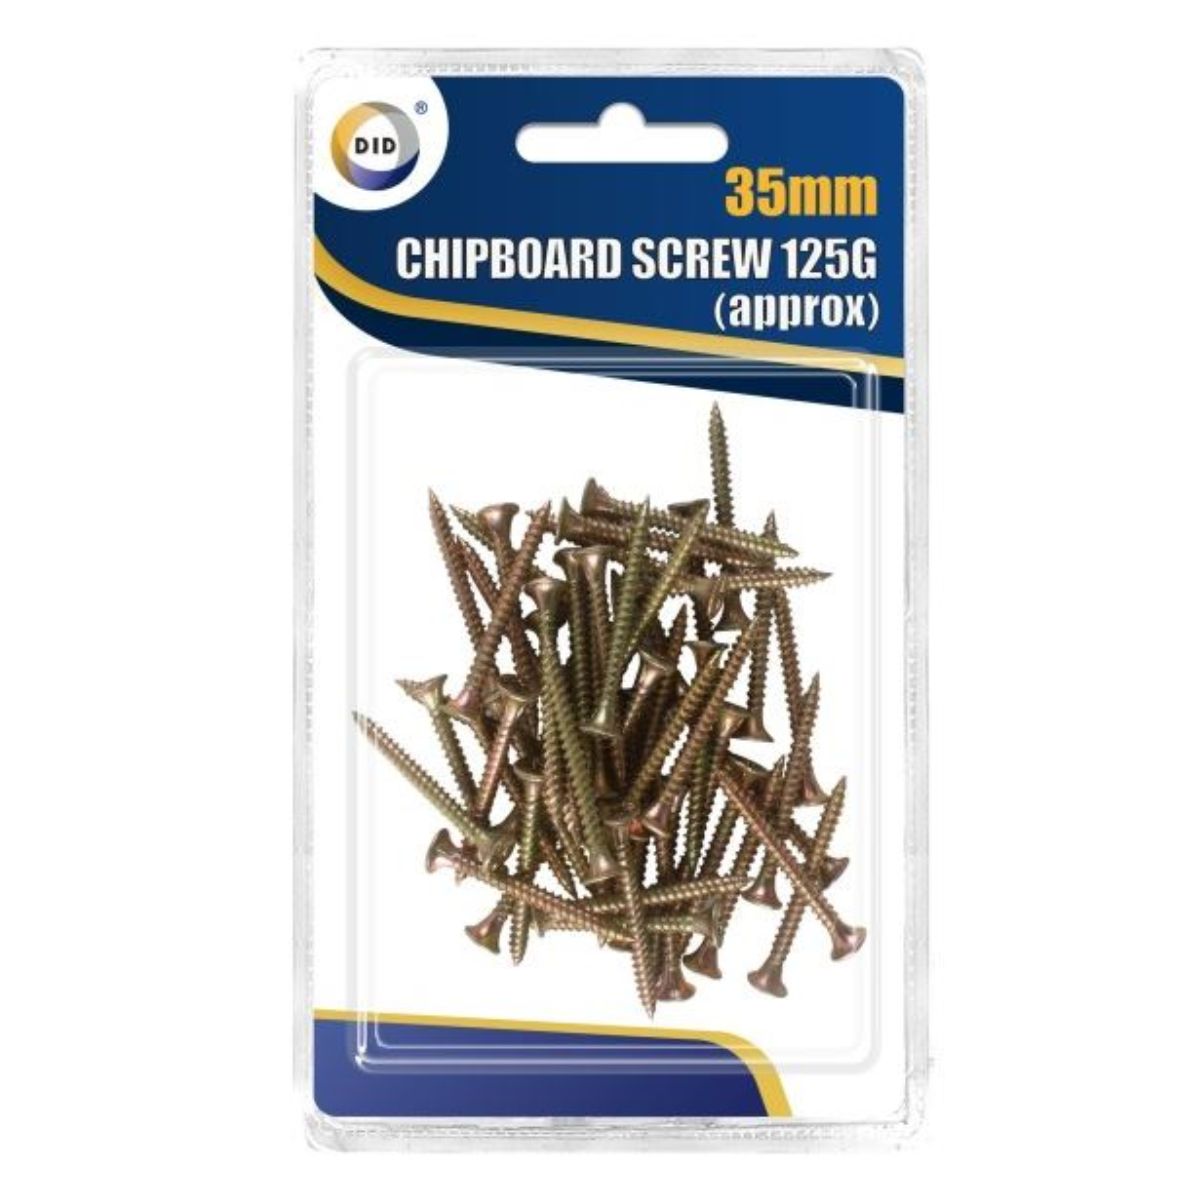 Packaging of DID - Chipboard Screws 35mm - 125g with approximately 125 golden screws visible through a clear plastic blister.